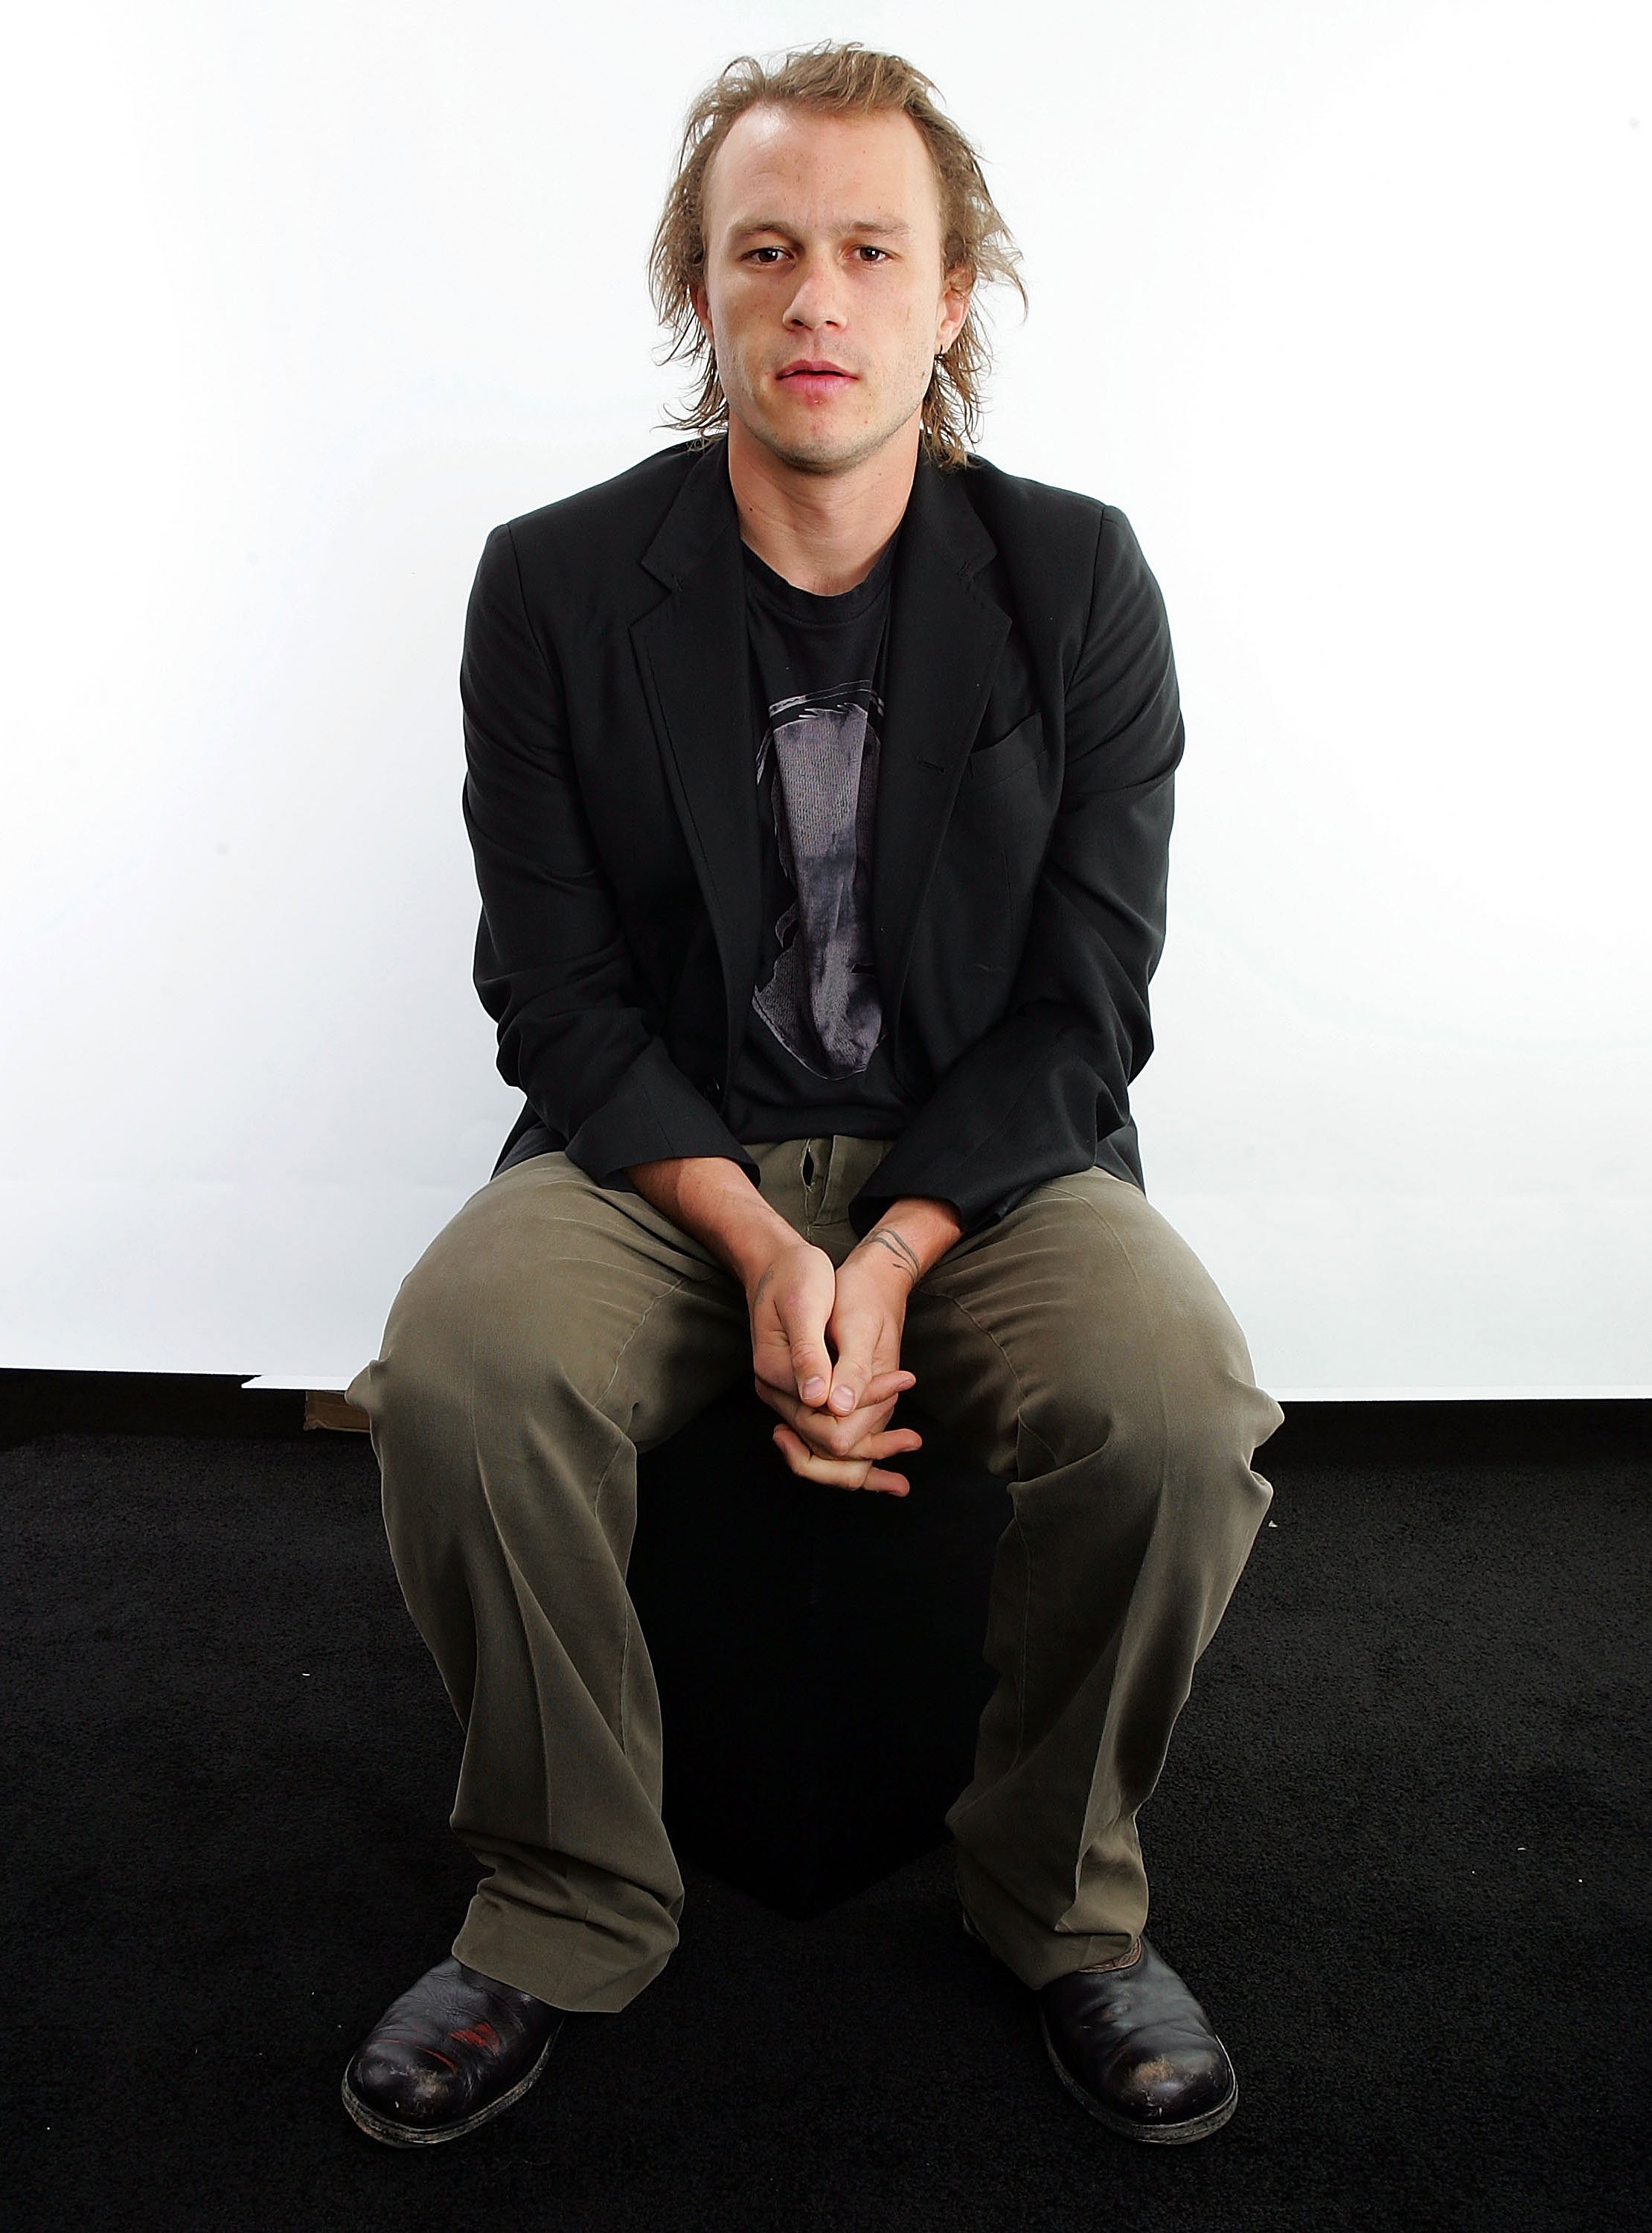 Heath Ledger posing for portraits in the Chanel Celebrity Suite at the Four Season hotel during the Toronto International Film Festival in Toronto, Canada | Photo: Carlo Allegri/Getty Images